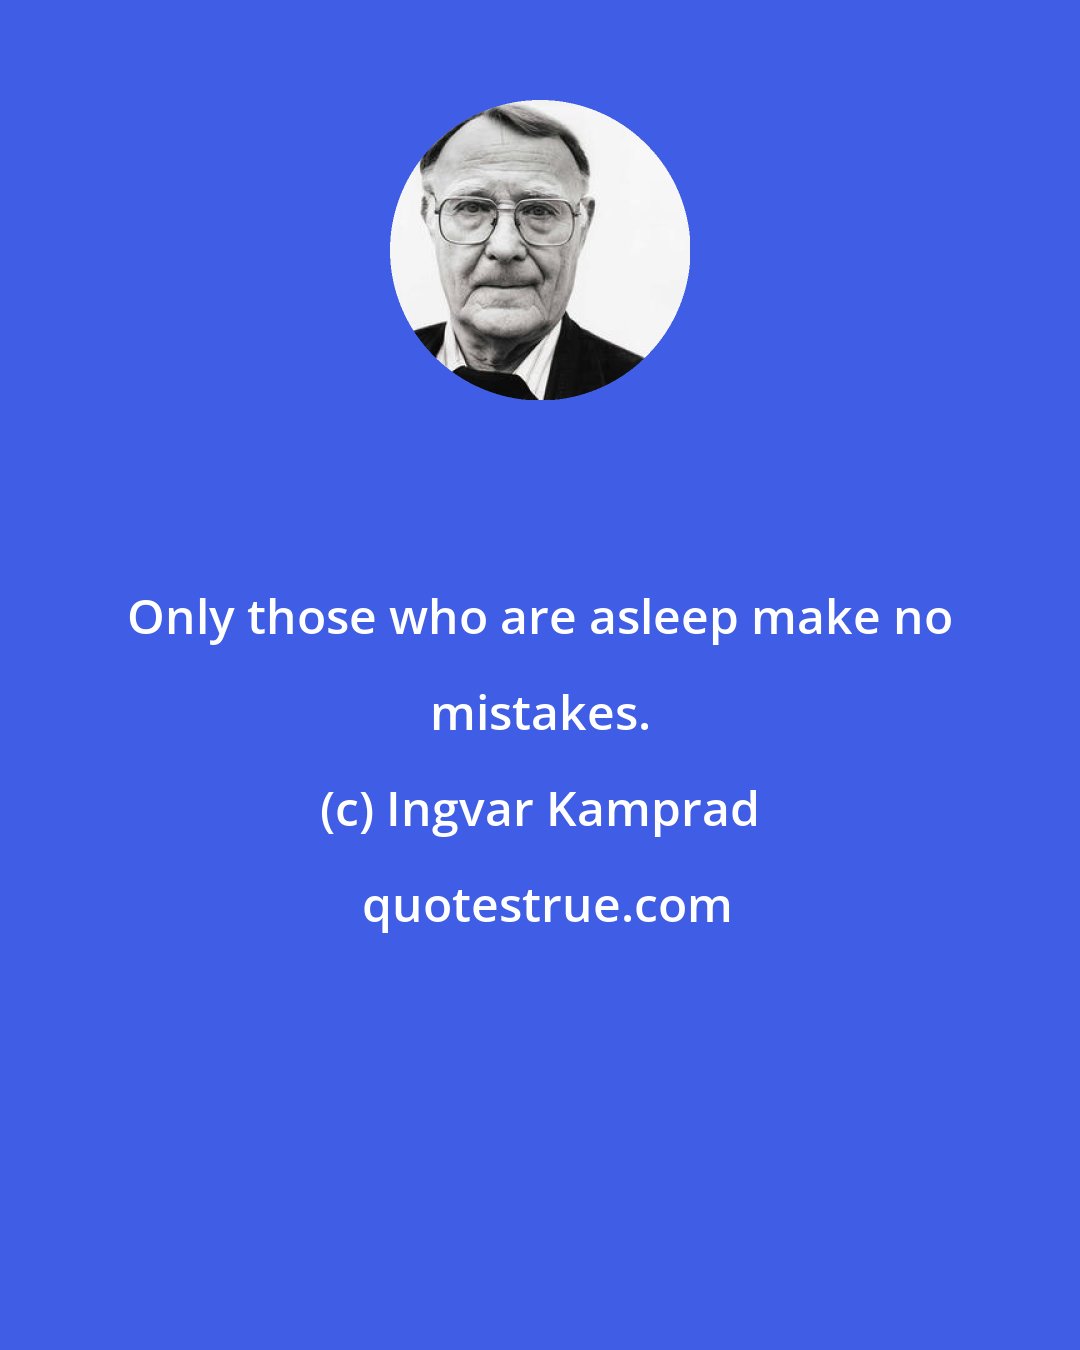 Ingvar Kamprad: Only those who are asleep make no mistakes.